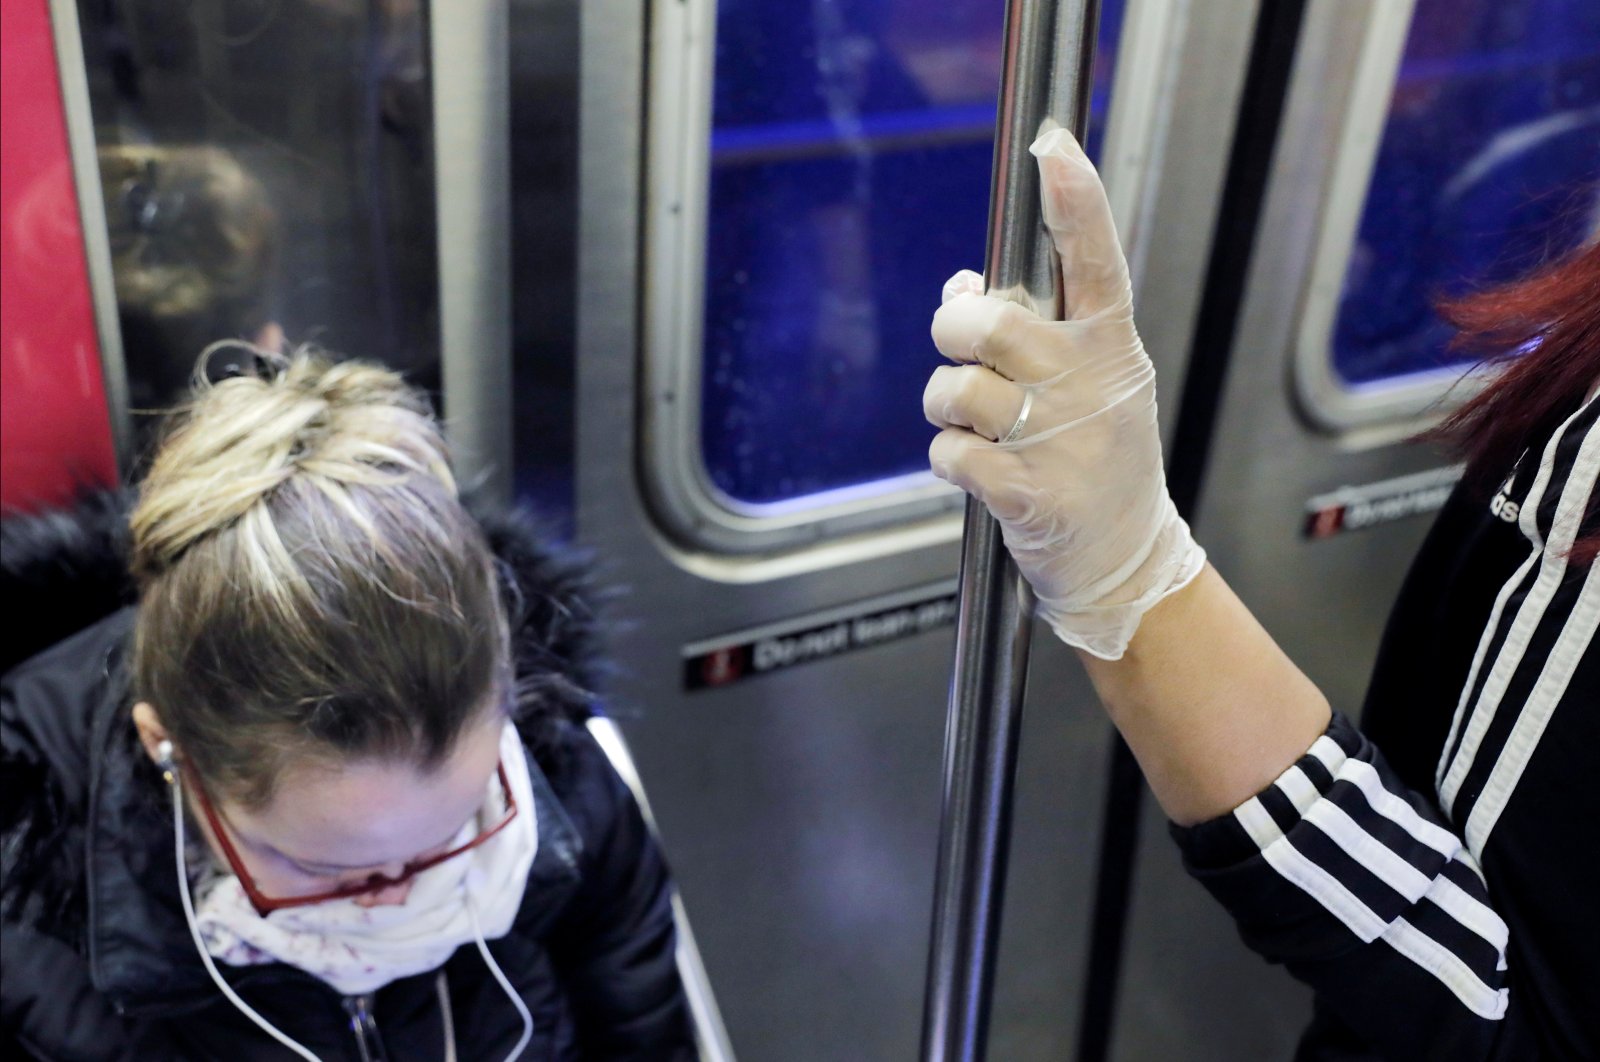 Commuters shield themselves on a peak hour subway as the coronavirus outbreak continued in Manhattan, New York City, New York, U.S., March 13. (Reuters Photo) 